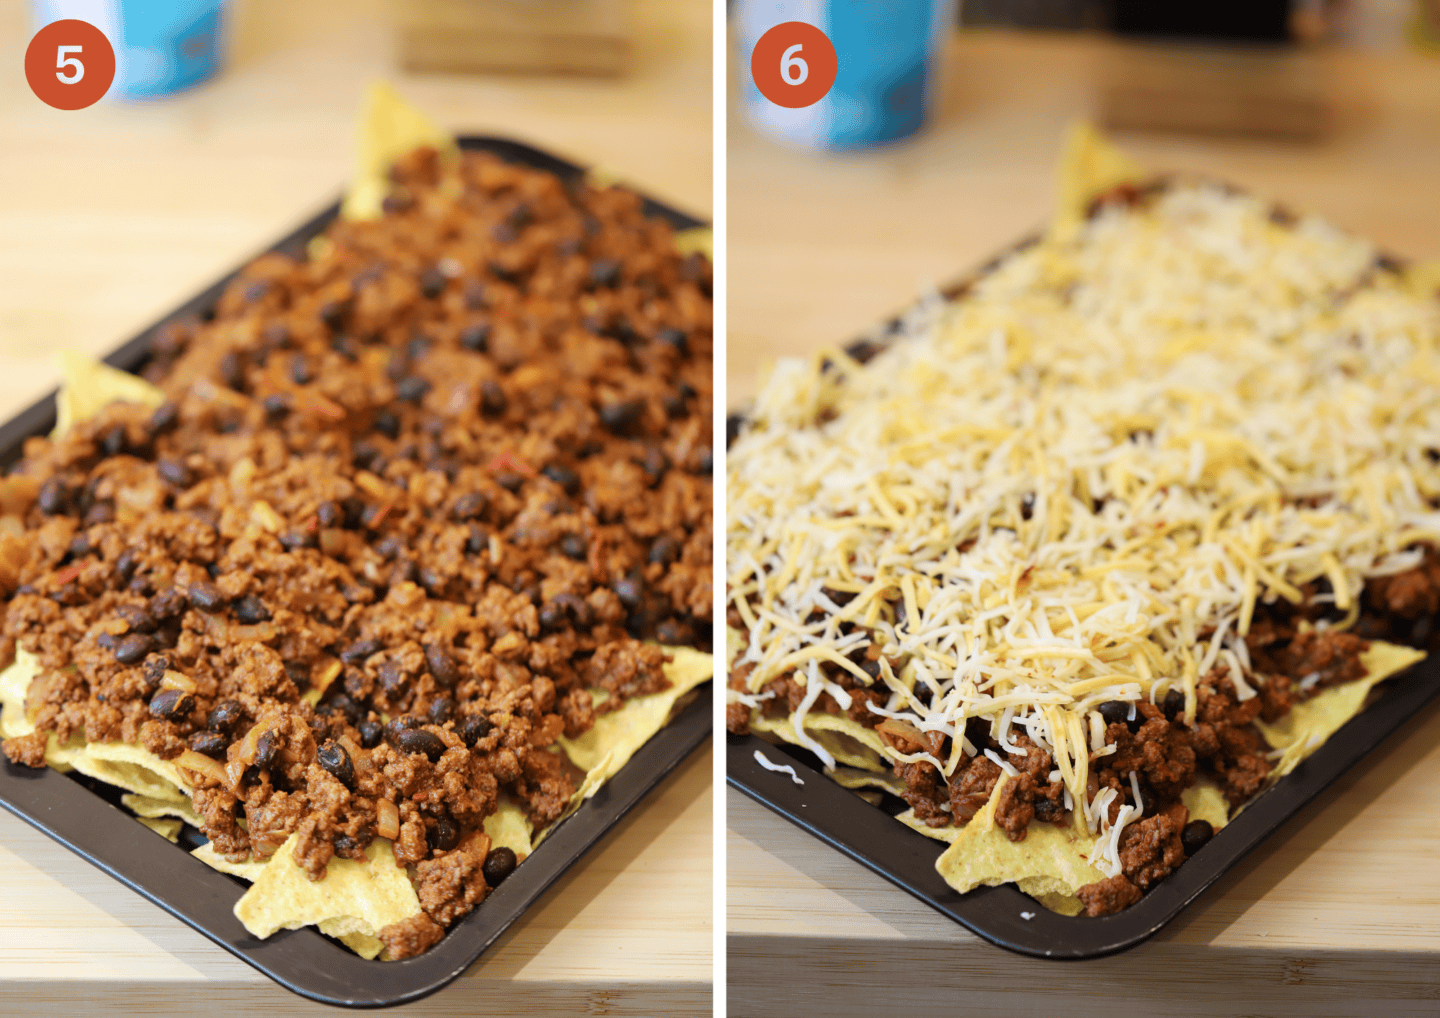 Top the nachos with the beef chilli (left) then cheese (right).